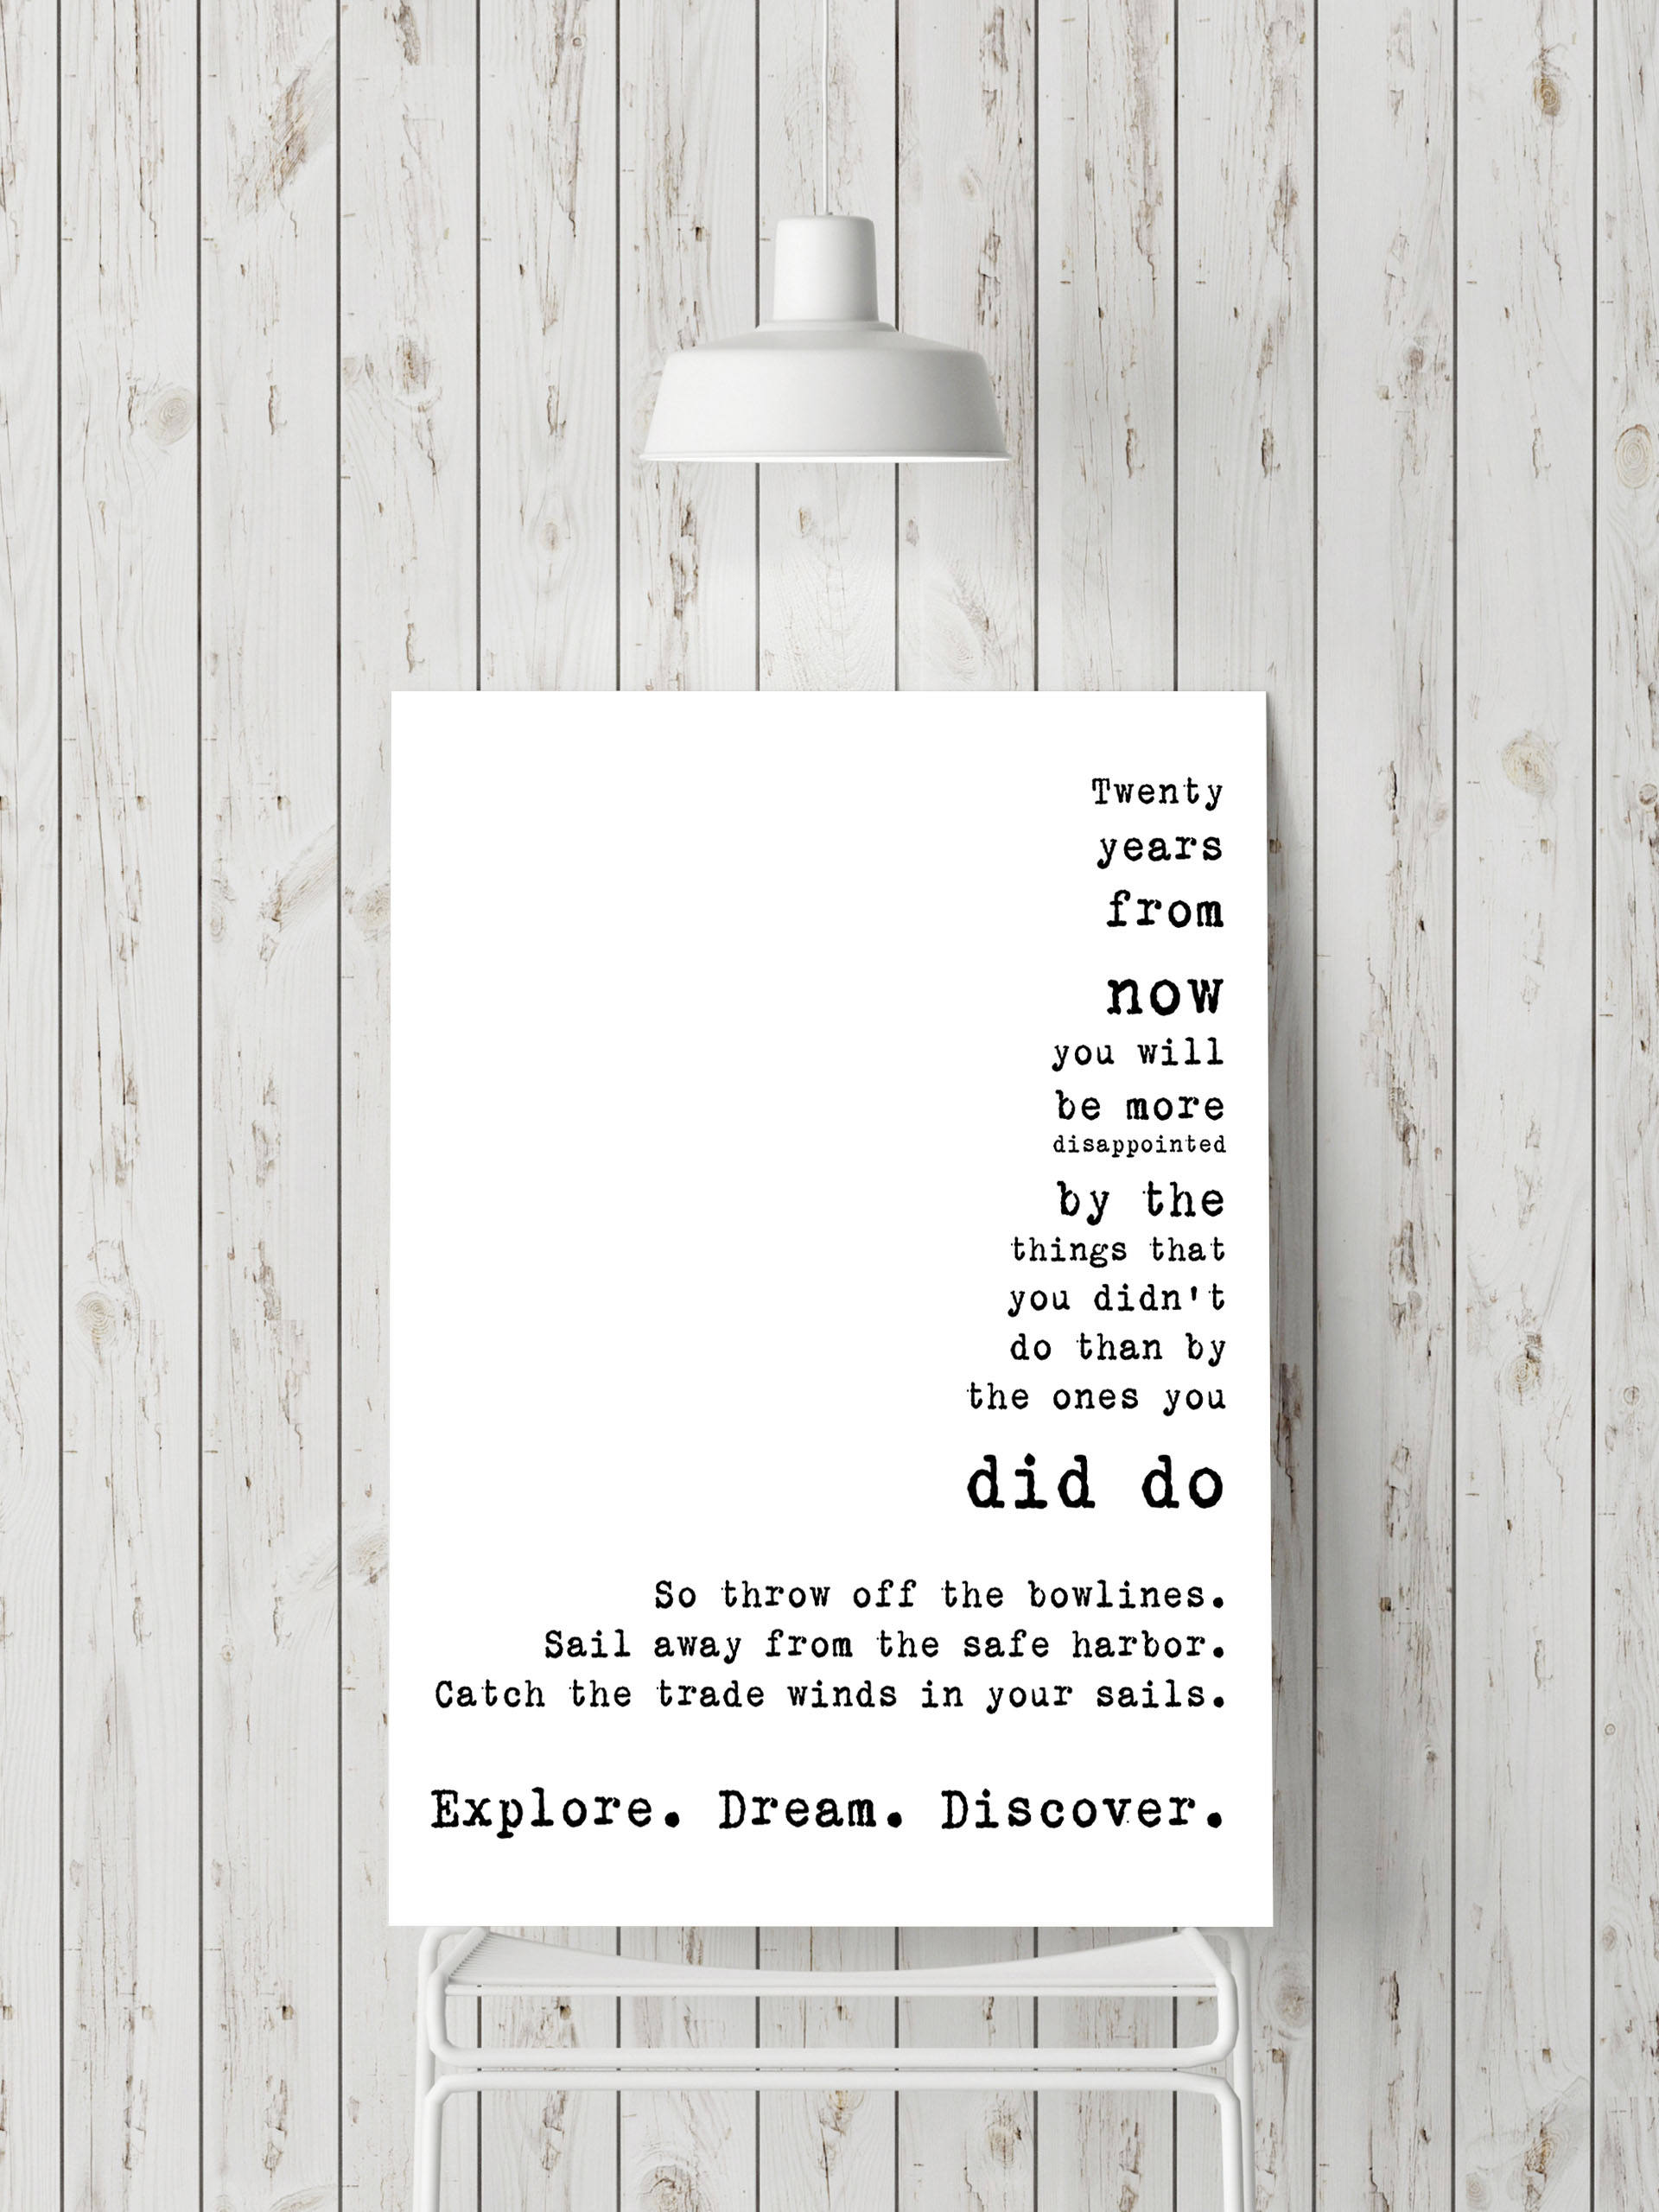 Quote Art Print Travel Decor, Mark Twain Inspirational Quote, Travel Art Unframed Home Decor, explore dream discover, twenty years from now - BookQuoteDecor